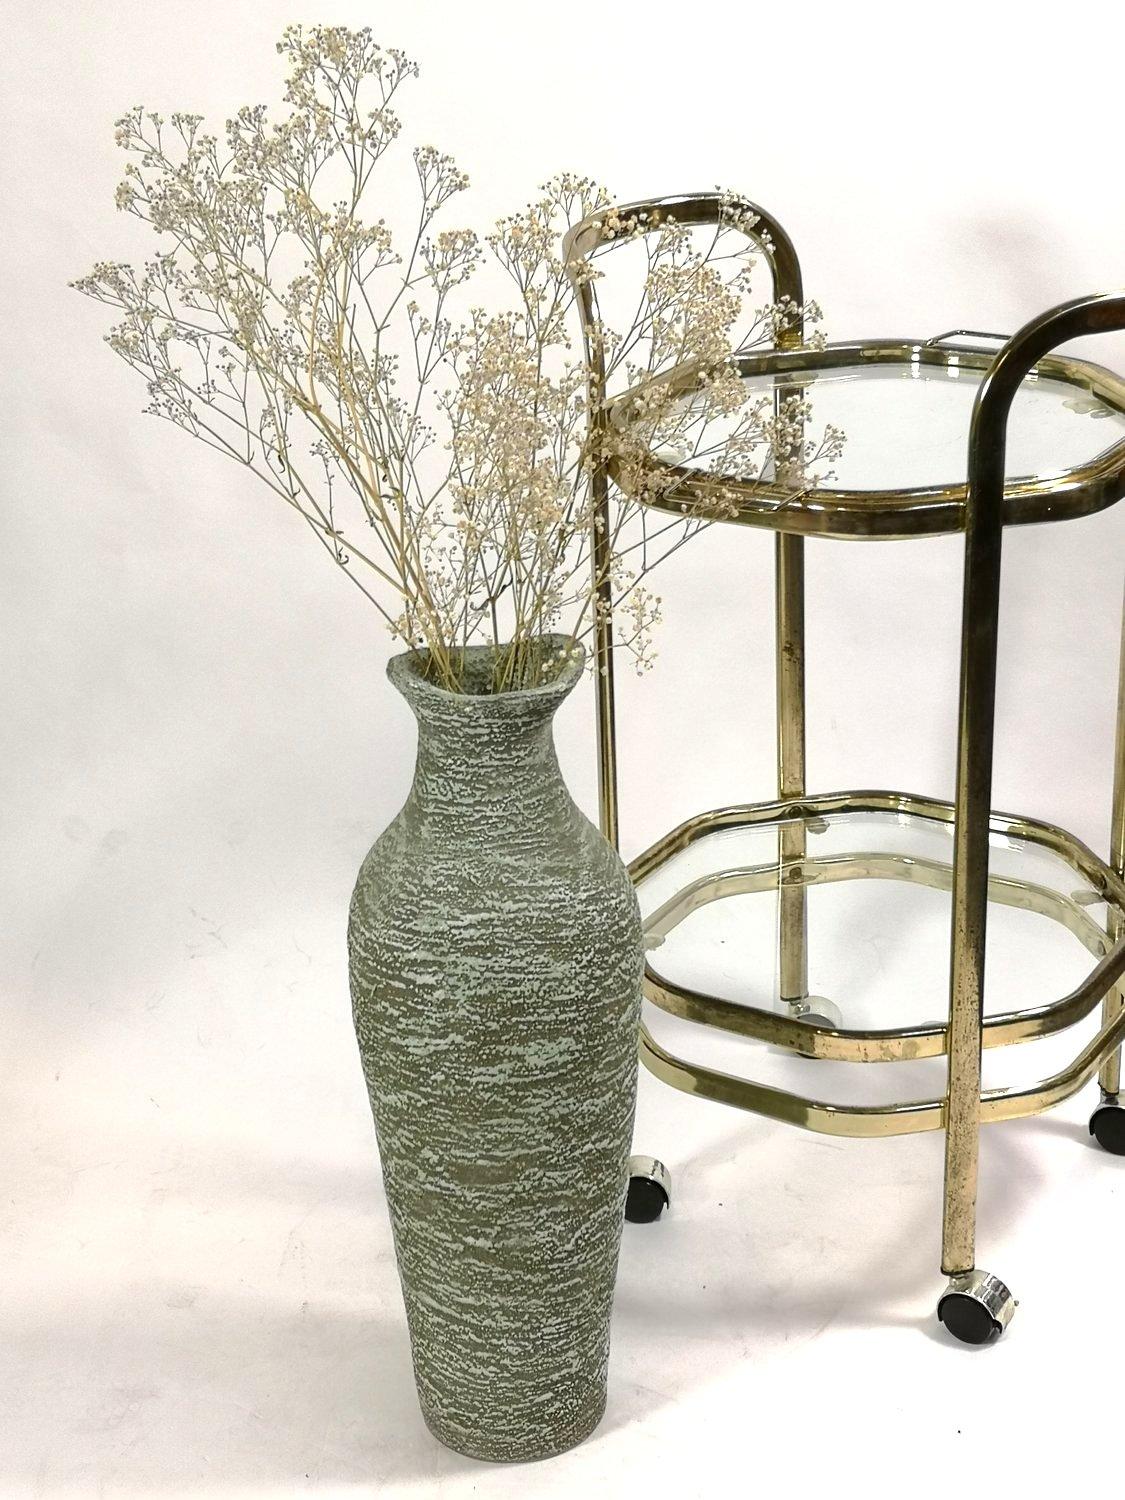 Special large greenish-brown ceramic floor vase from Pesthidegkút, Huingary, 1970's. This beautiful retro elegant looking slim shaped ceramic vase is in flawless beautiful vintage condition. Covered with a samot glaze typical of the Pesthidegkút